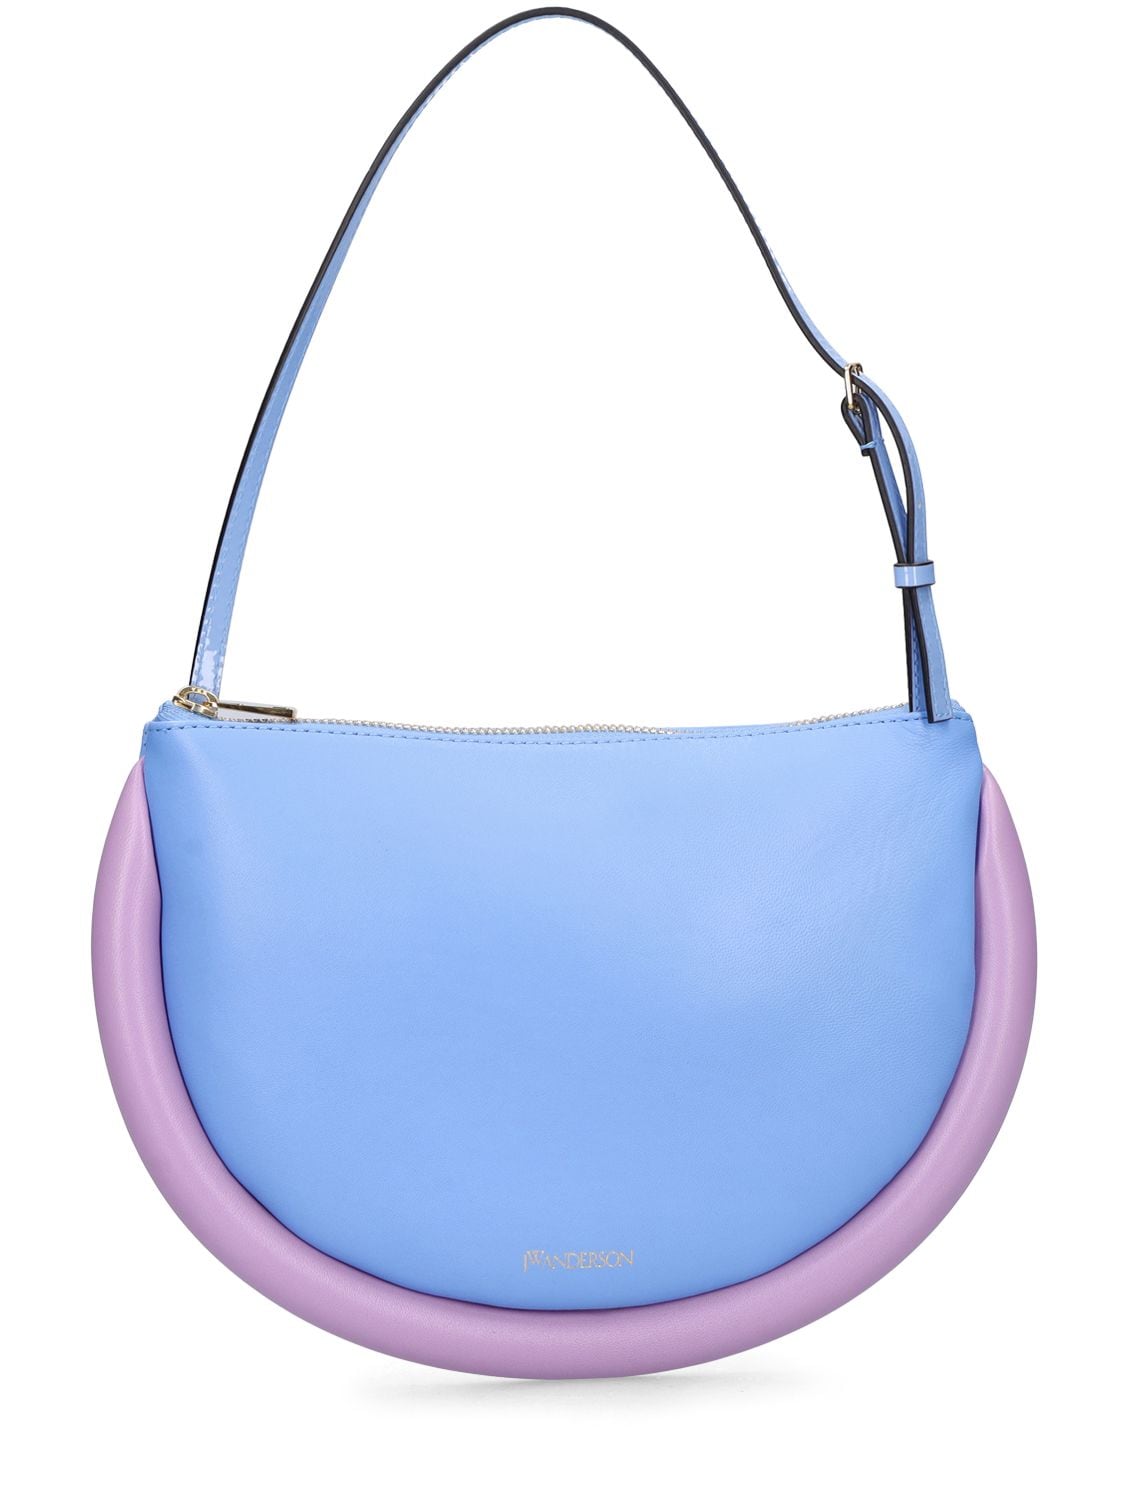 The Bumper-moon Leather Bag